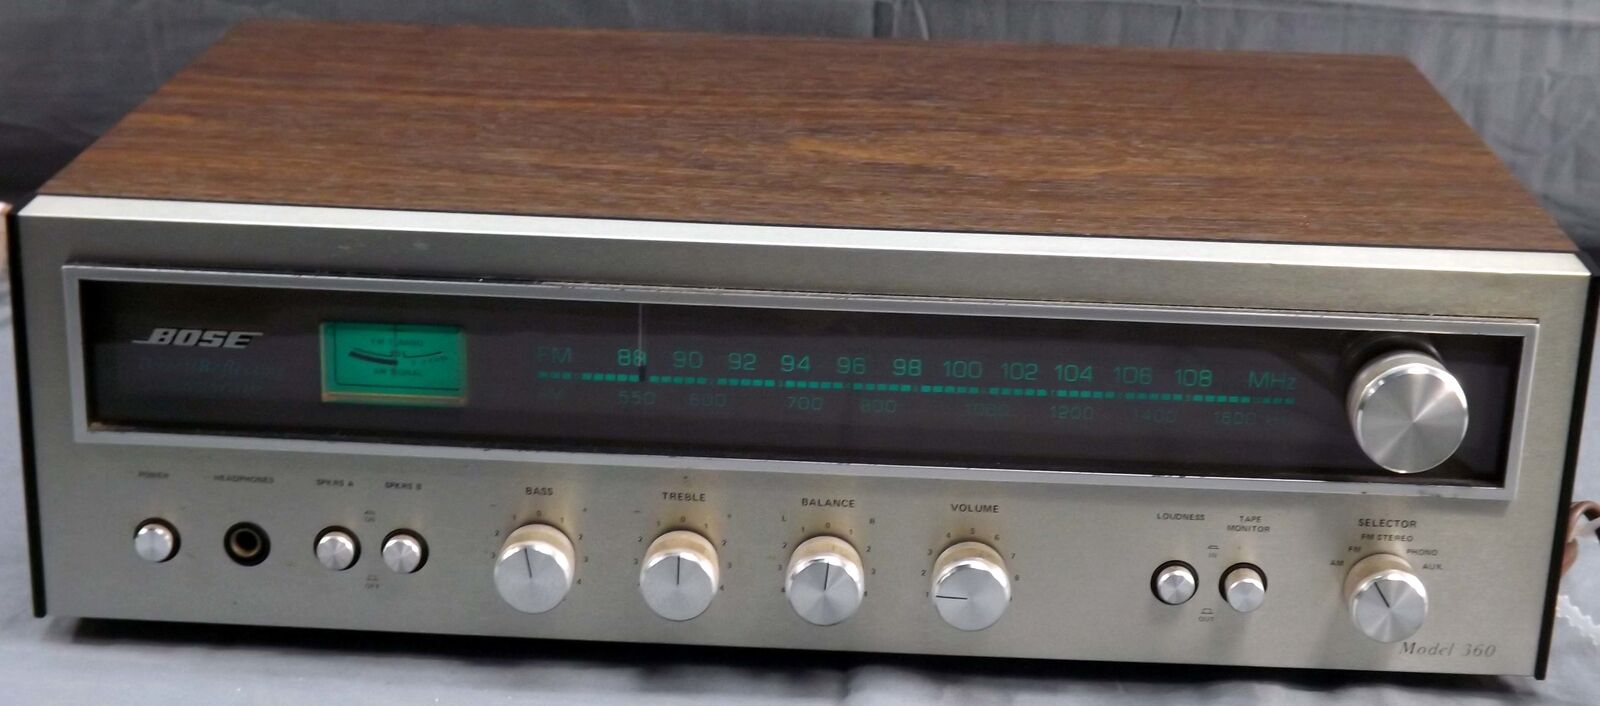 Vintage Bose Direct Reflecting Stereo Receiver Model 360 Music System AM/FM READ